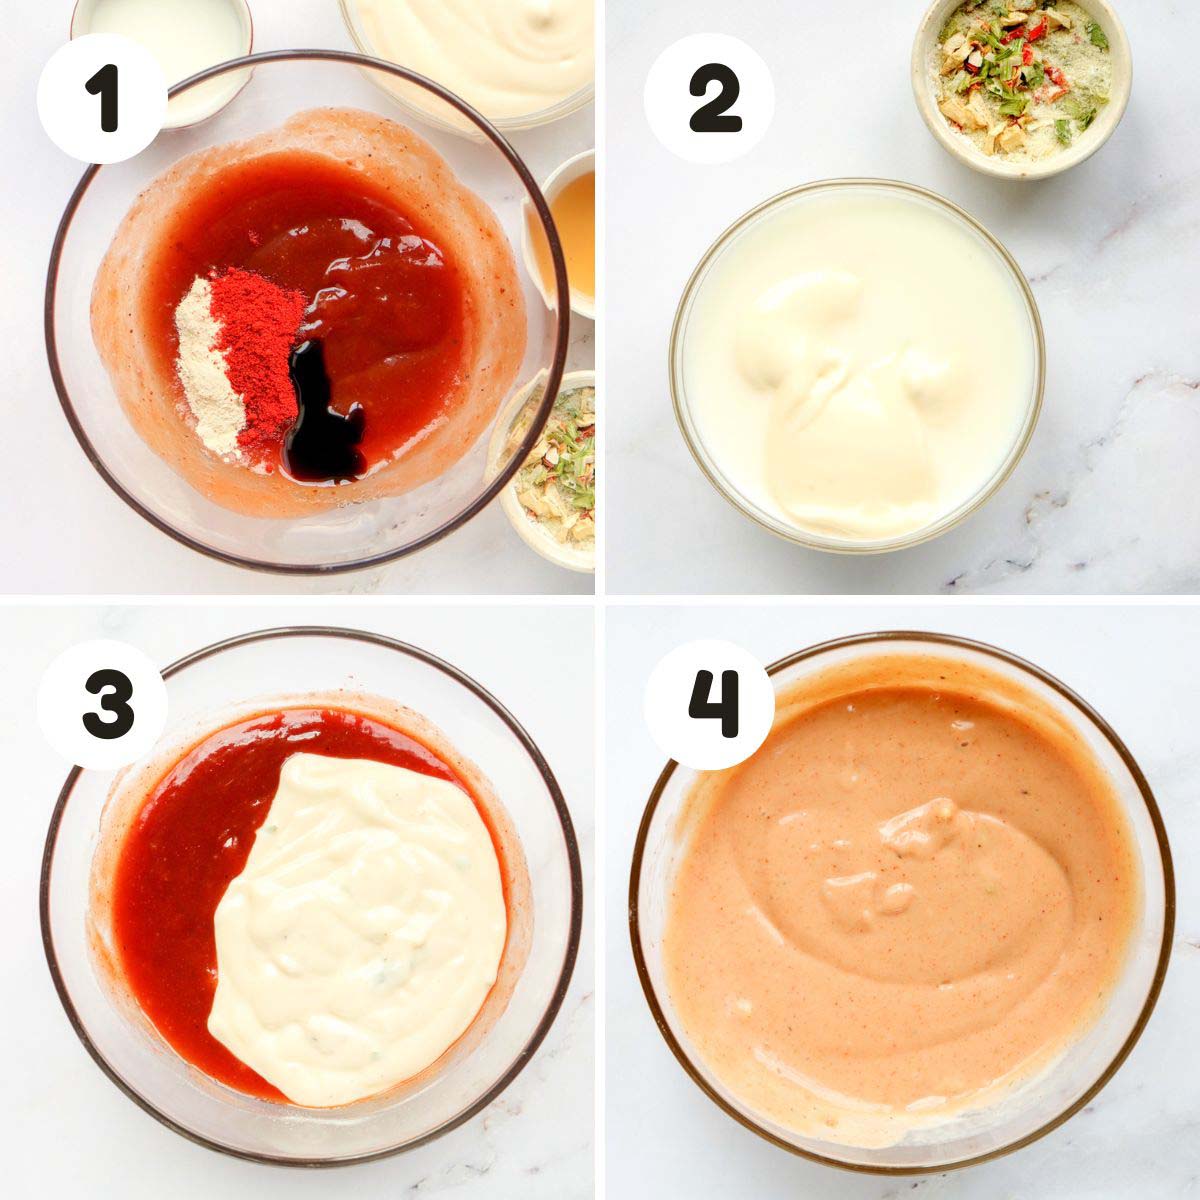 Steps to make the dressing.